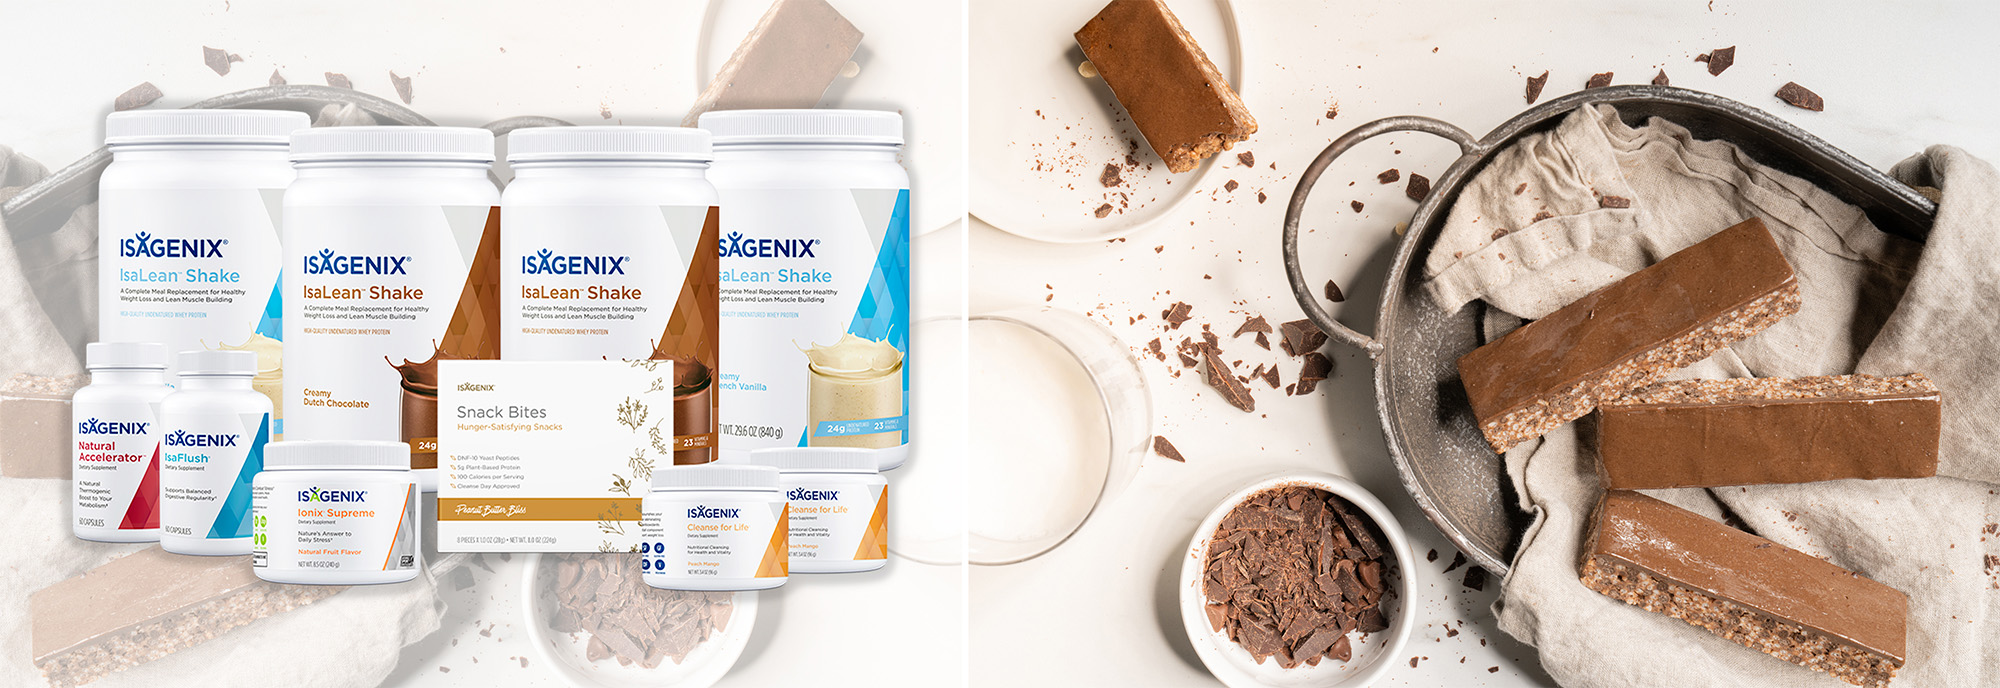 isagenix afterpay